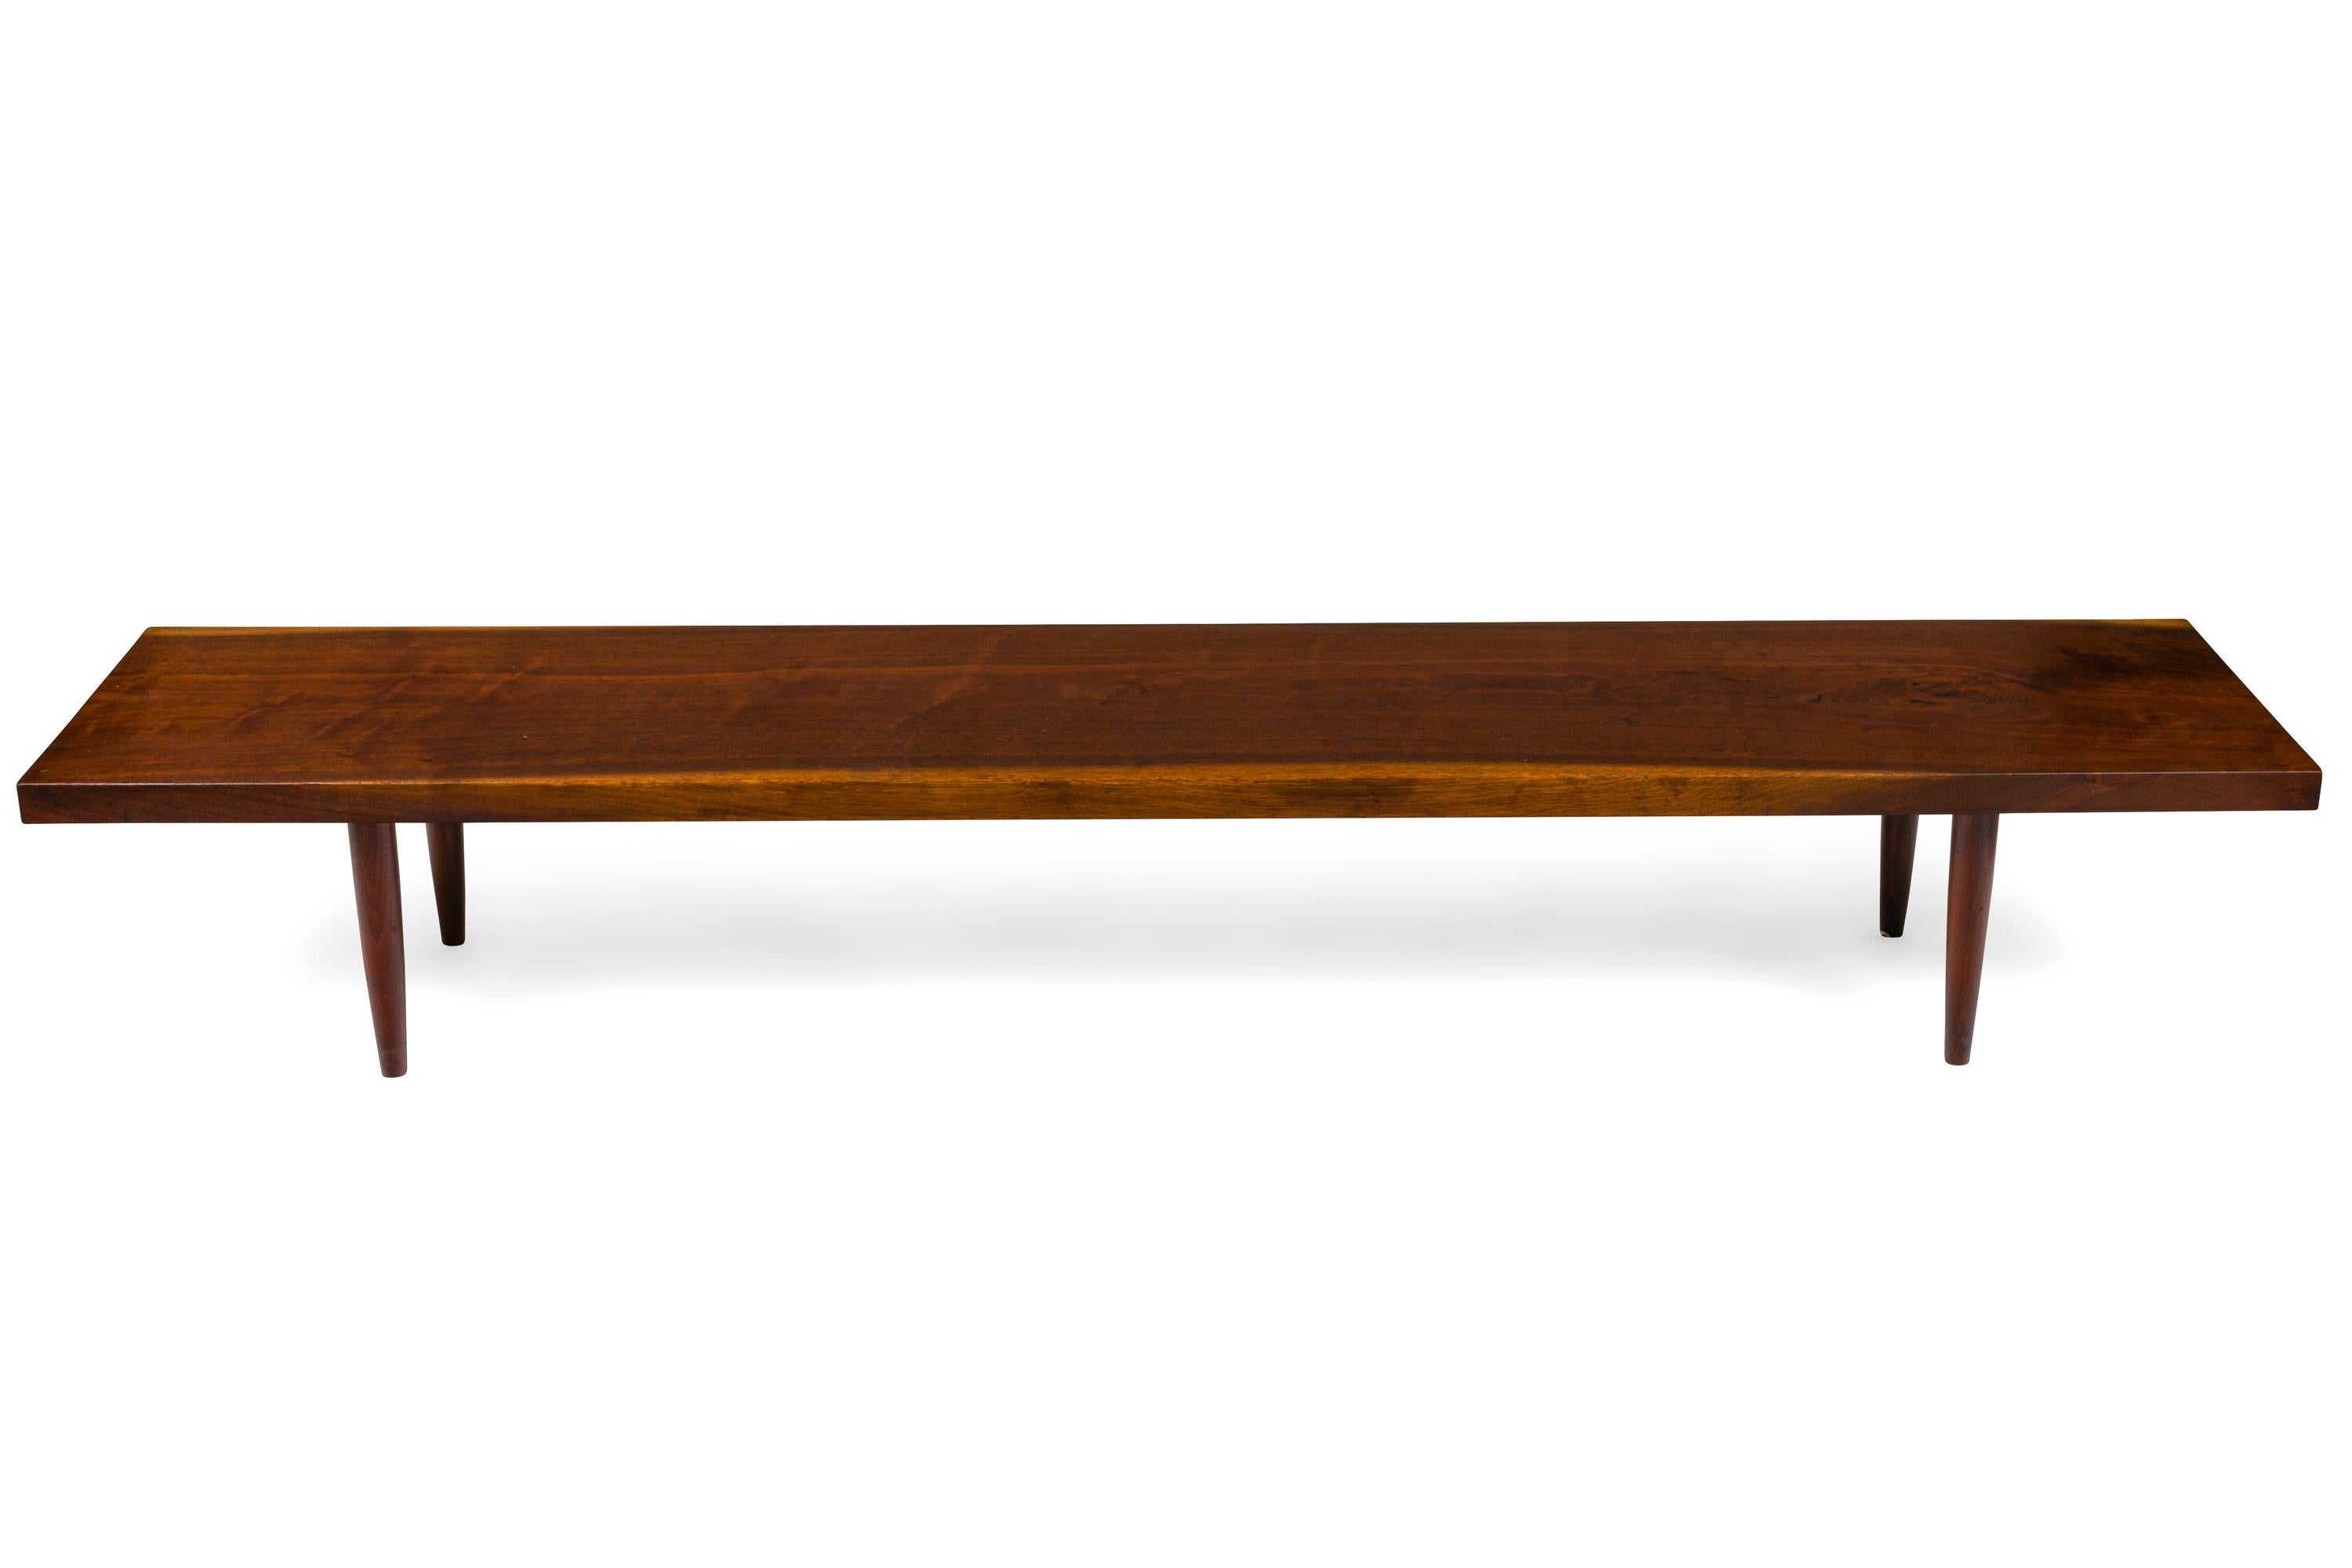 Another of George Nakashima's simple but brilliant early designs. Solid and sturdy this slab bench could function in a variety of settings including as a coffee table.